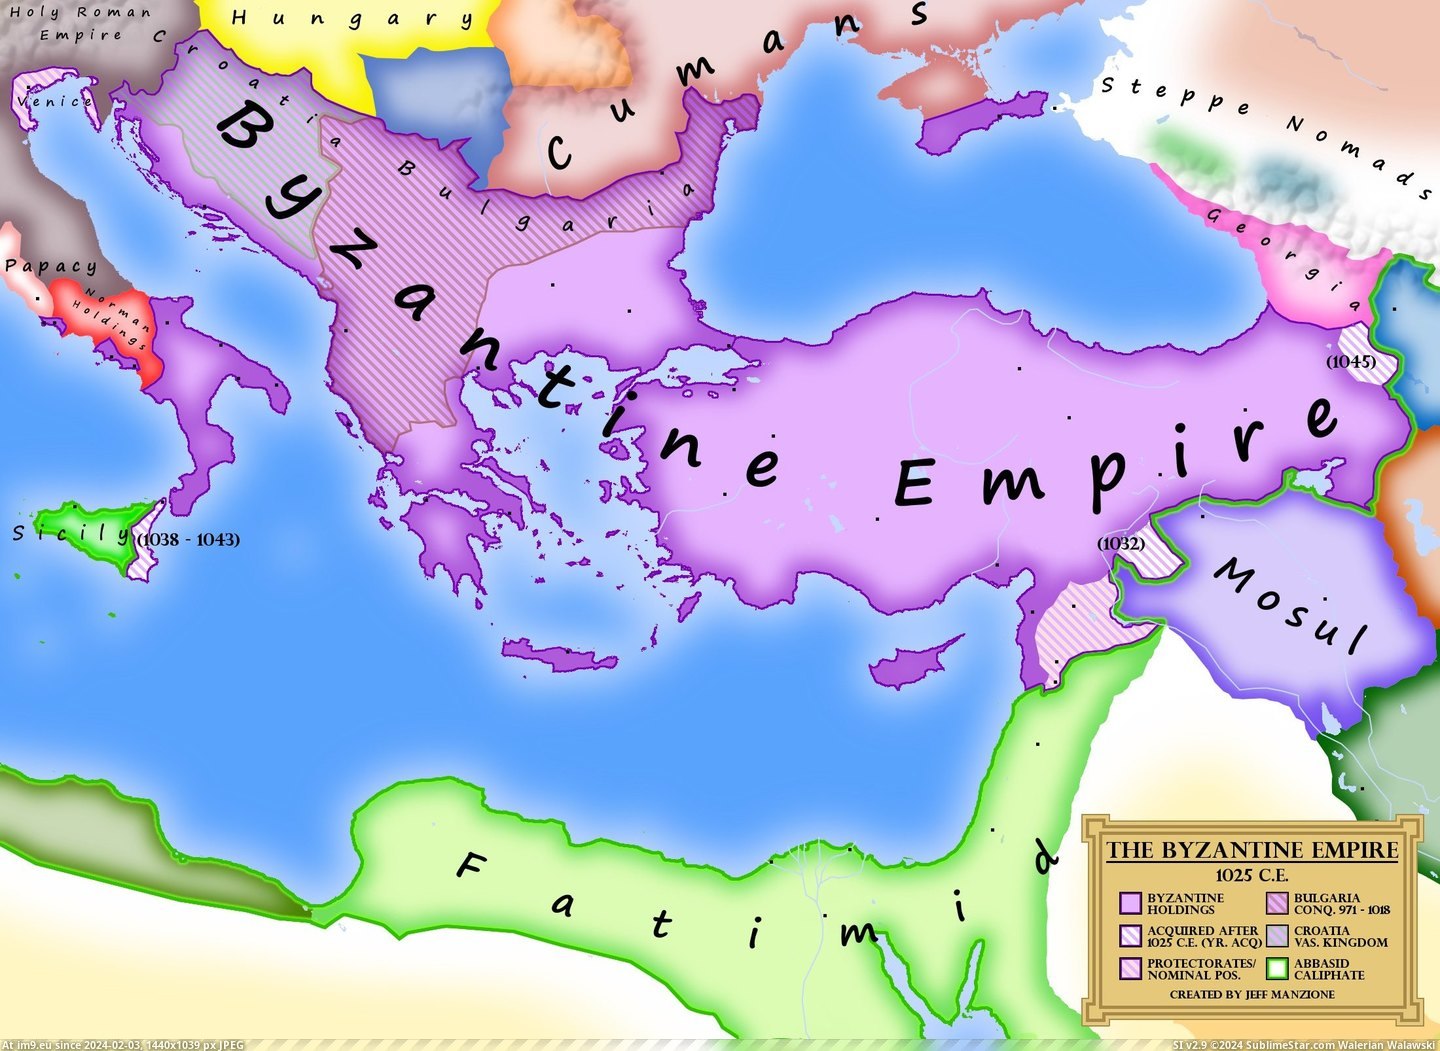 #Empire  #Byzantine [Mapporn] Byzantine Empire at 1025 A.D. made by me [2200x1600] Pic. (Image of album My r/MAPS favs))